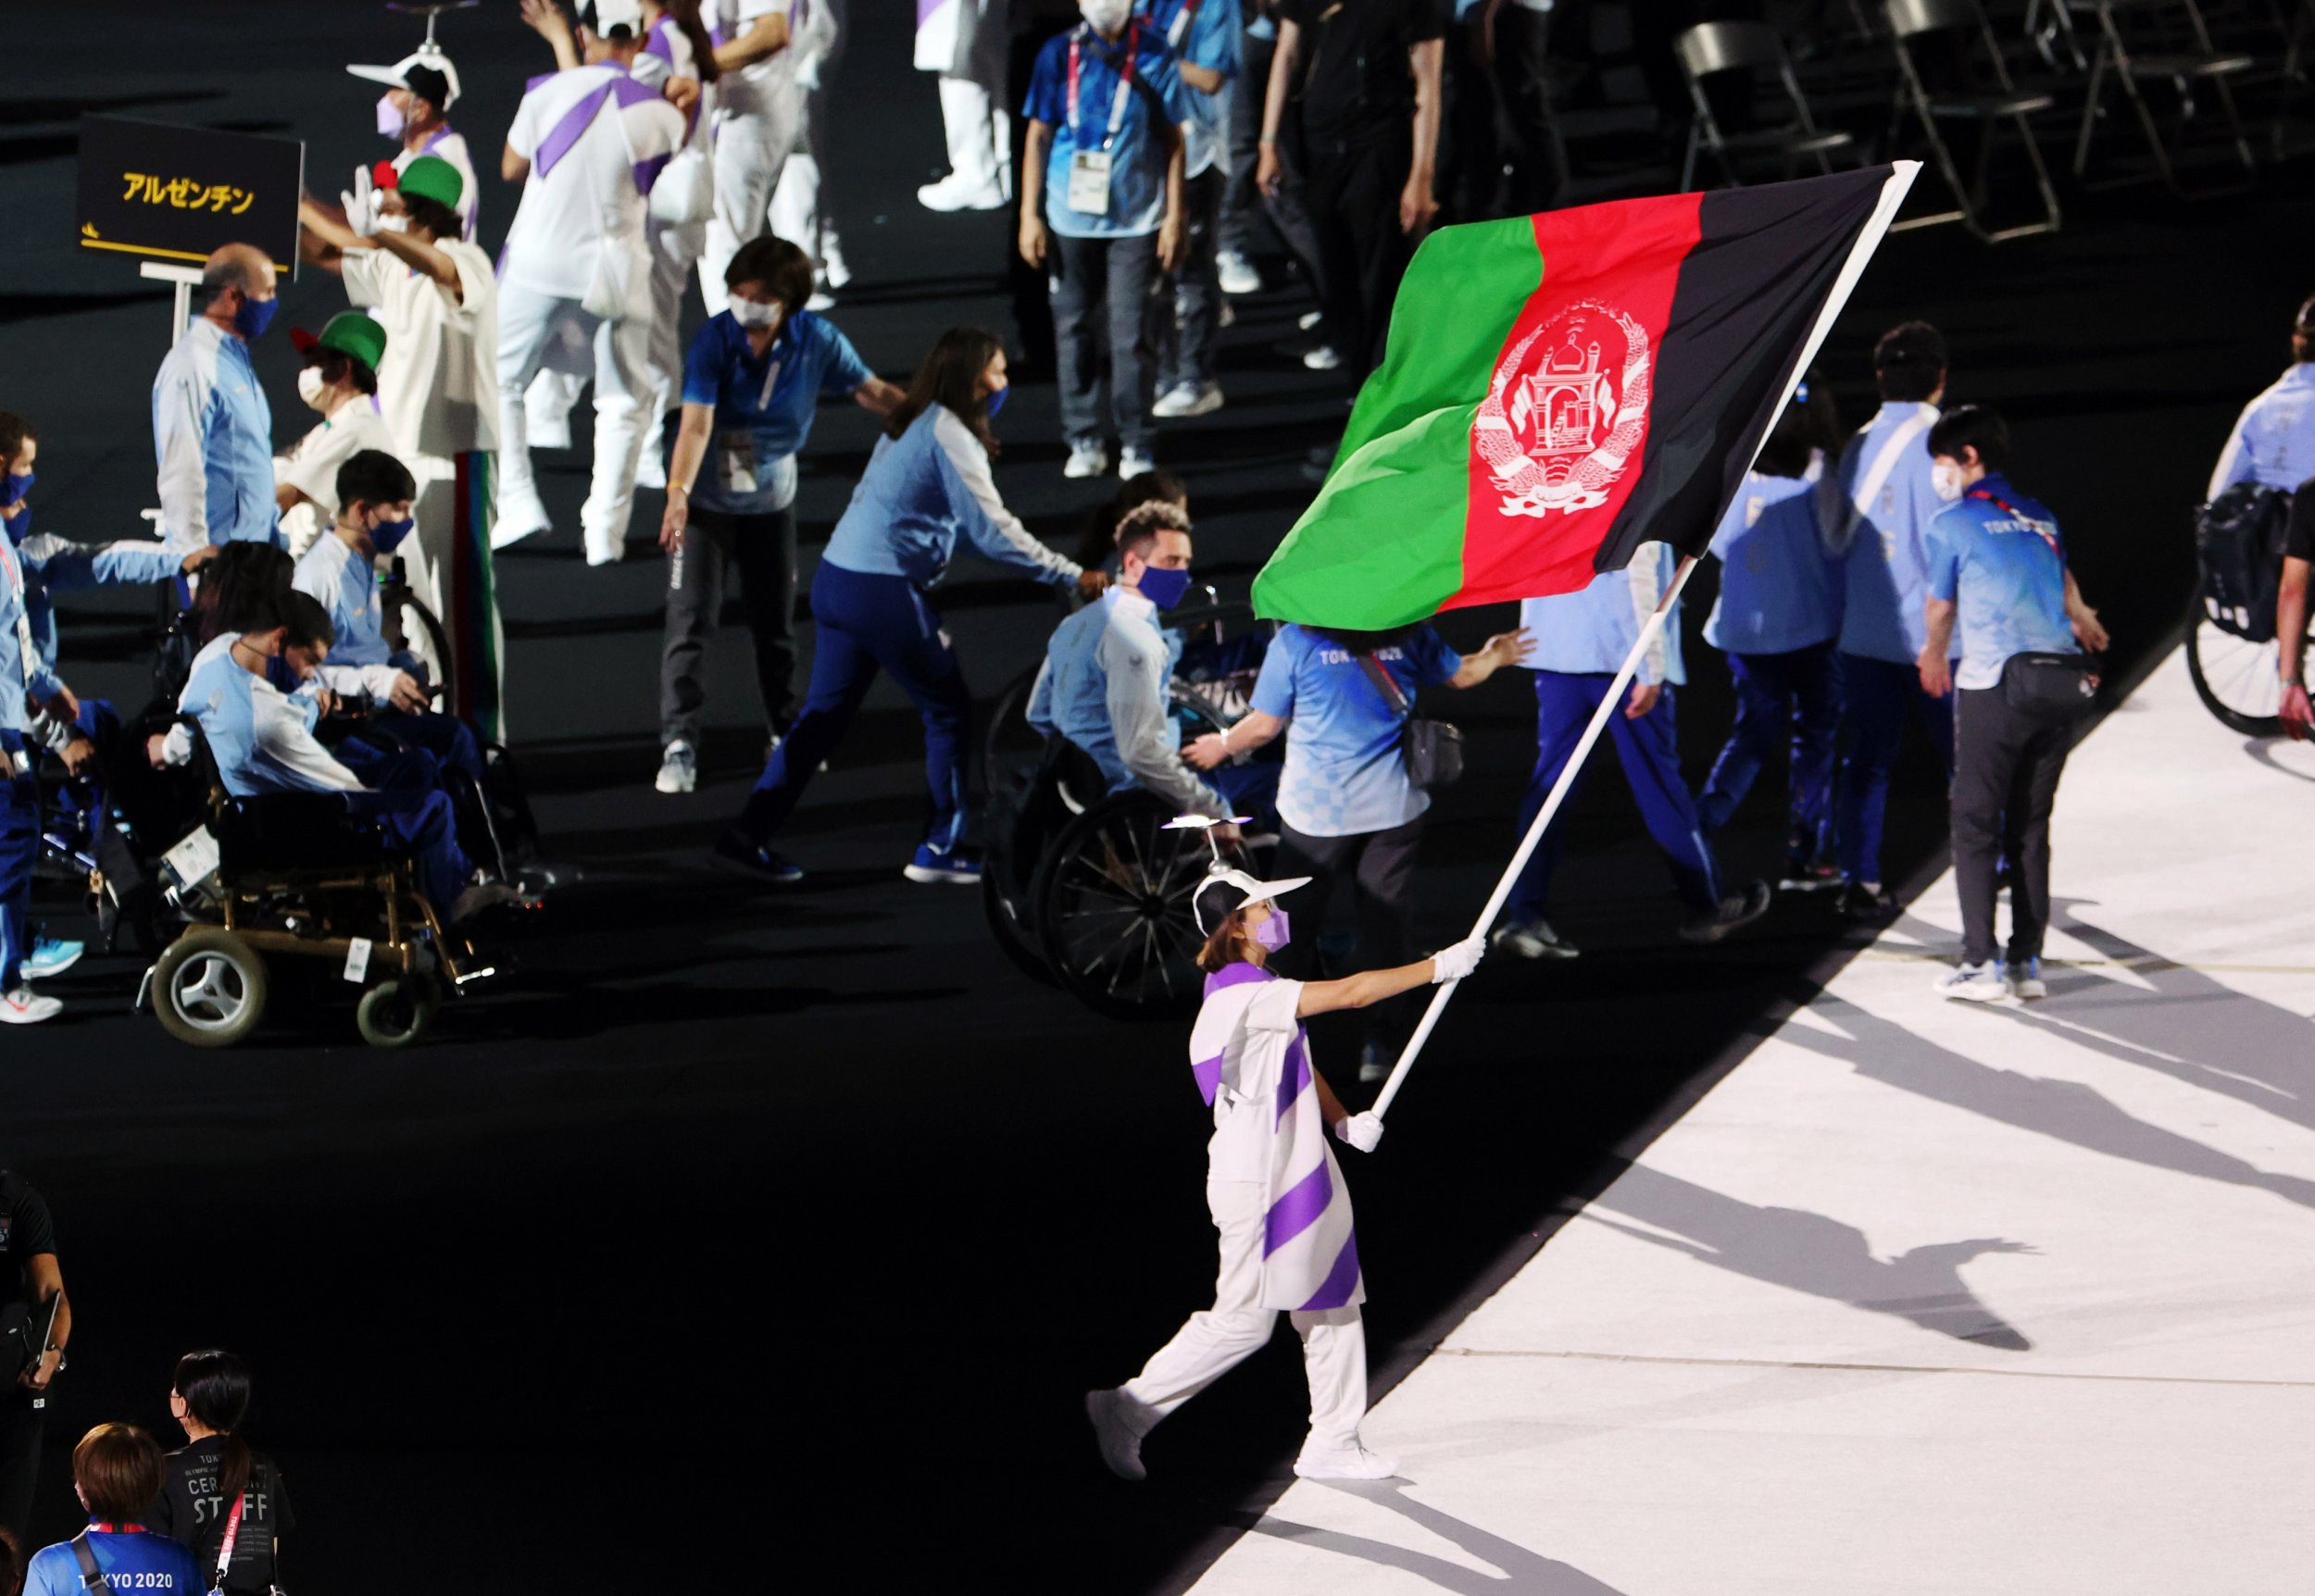 Heartbreaking moment Afghan flag flown at Paralympics with no athletes behind it